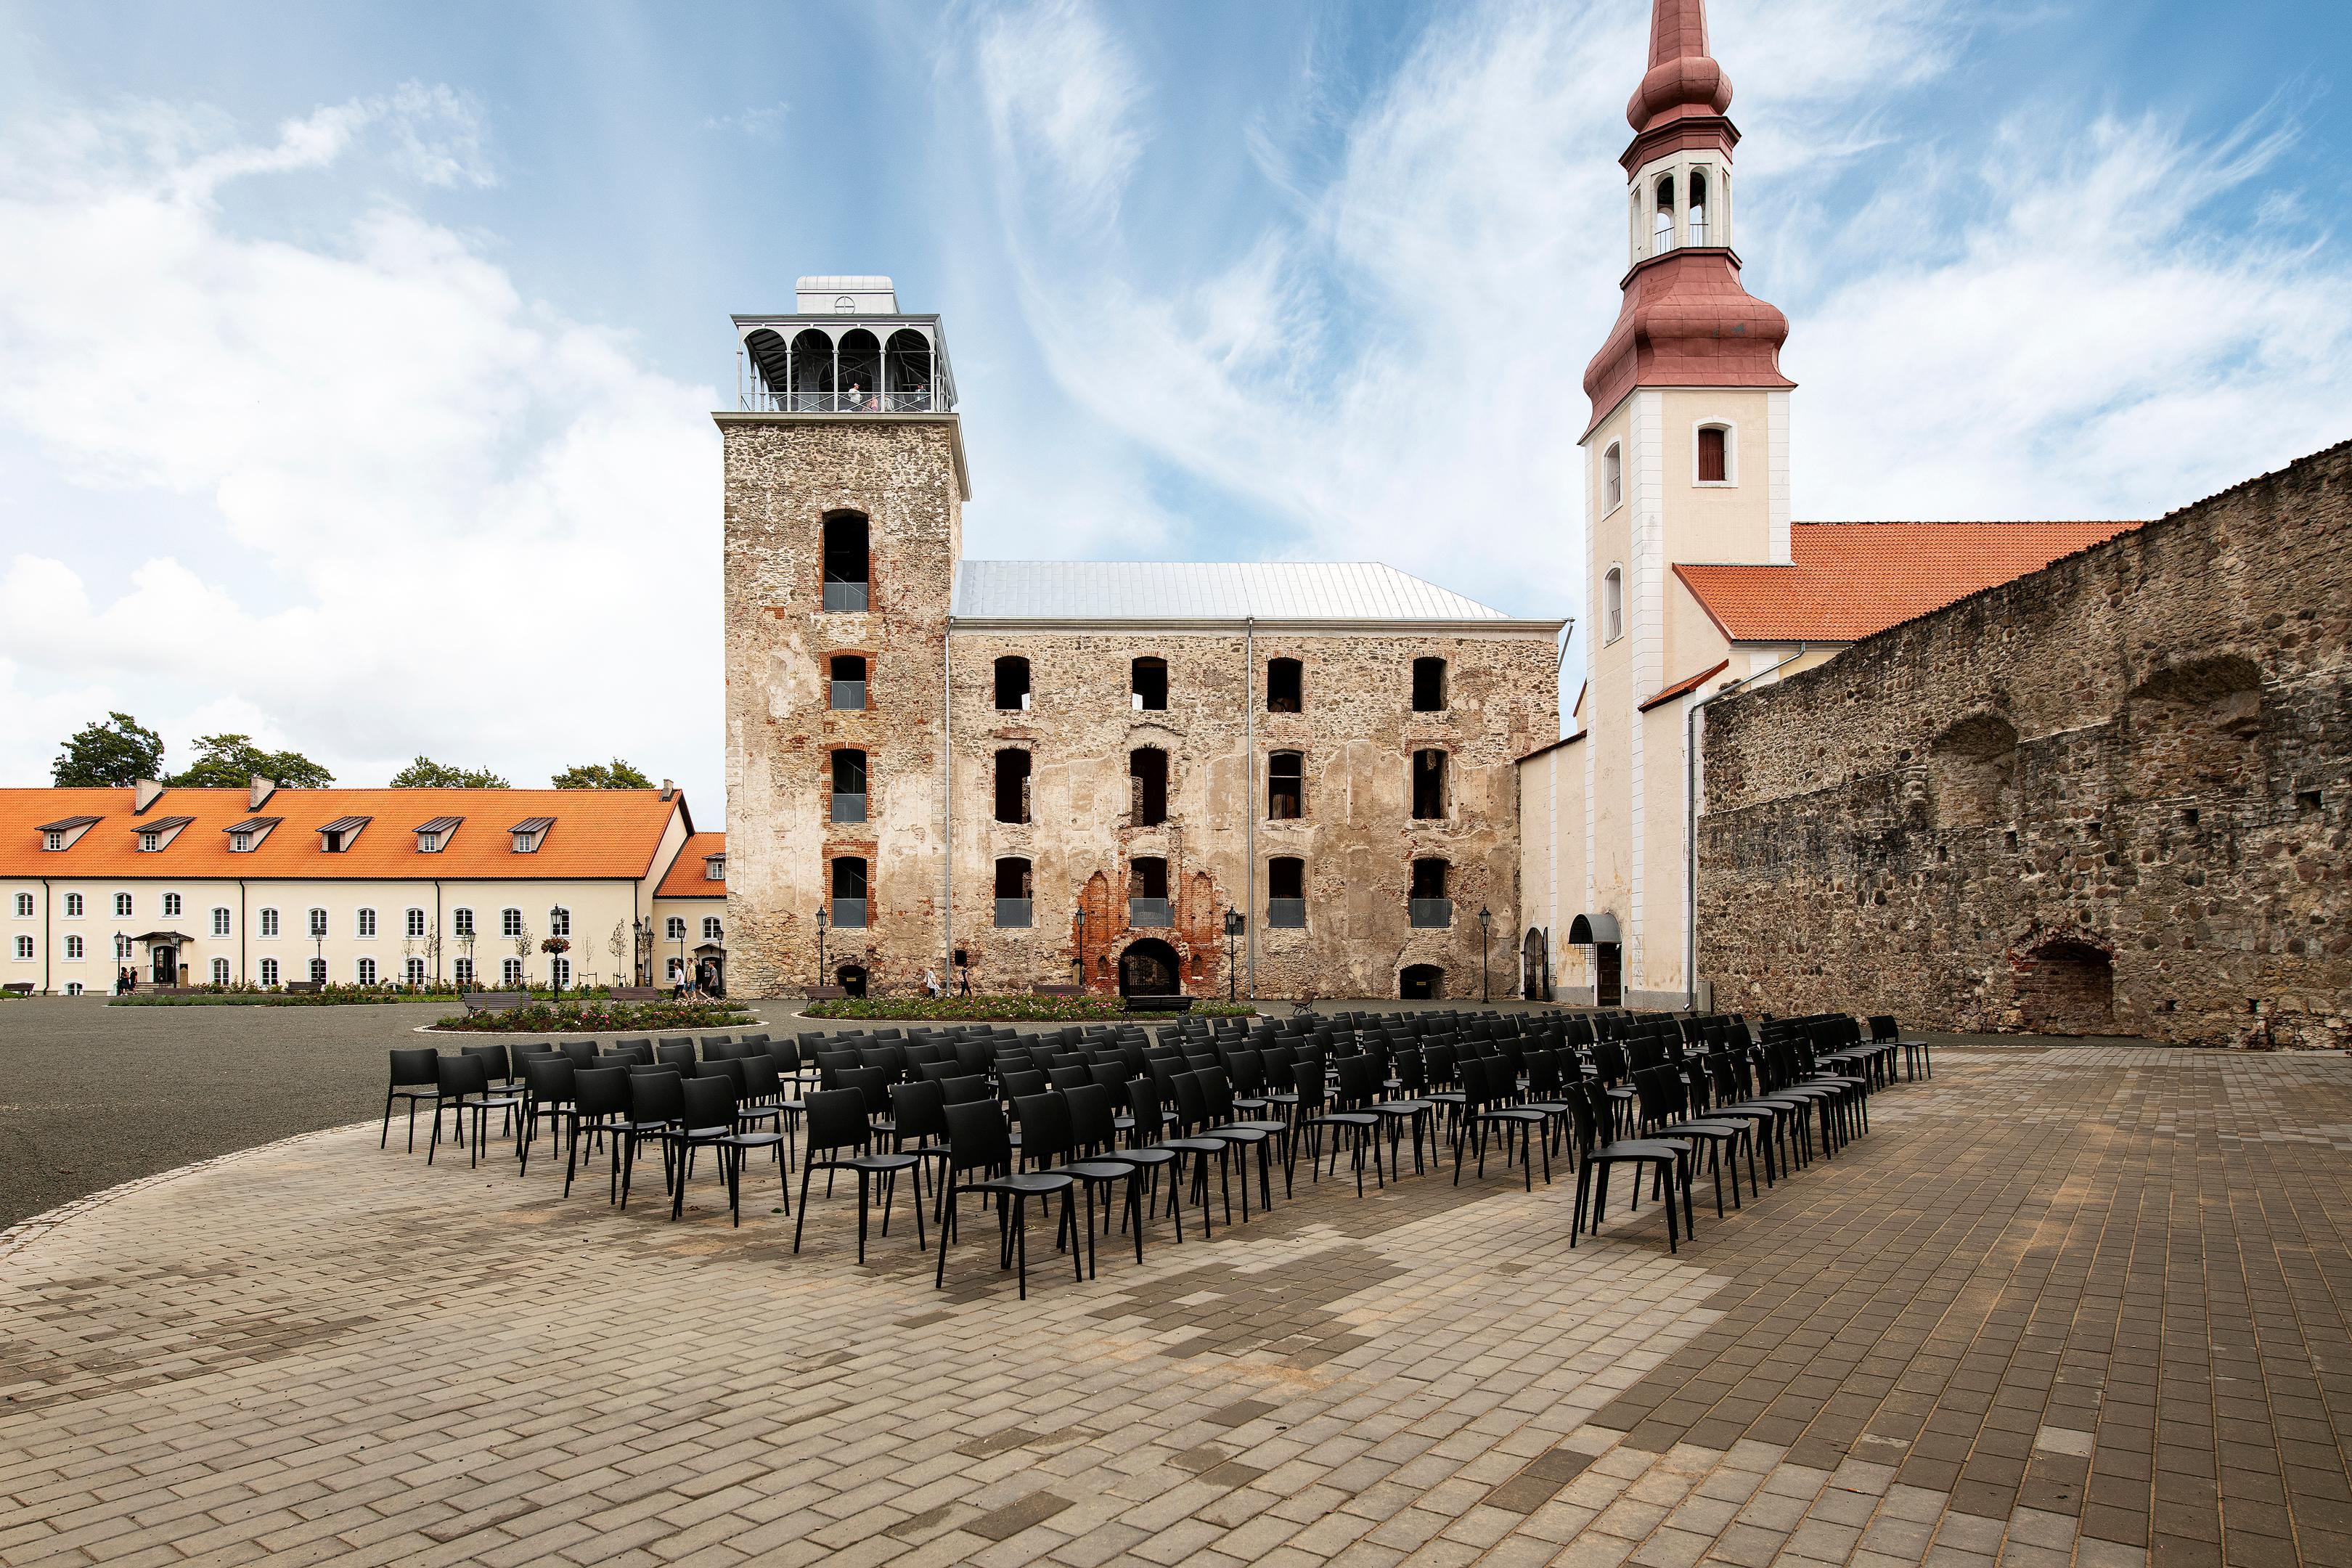 Courtyard and convent building of Põltsamaa Castle